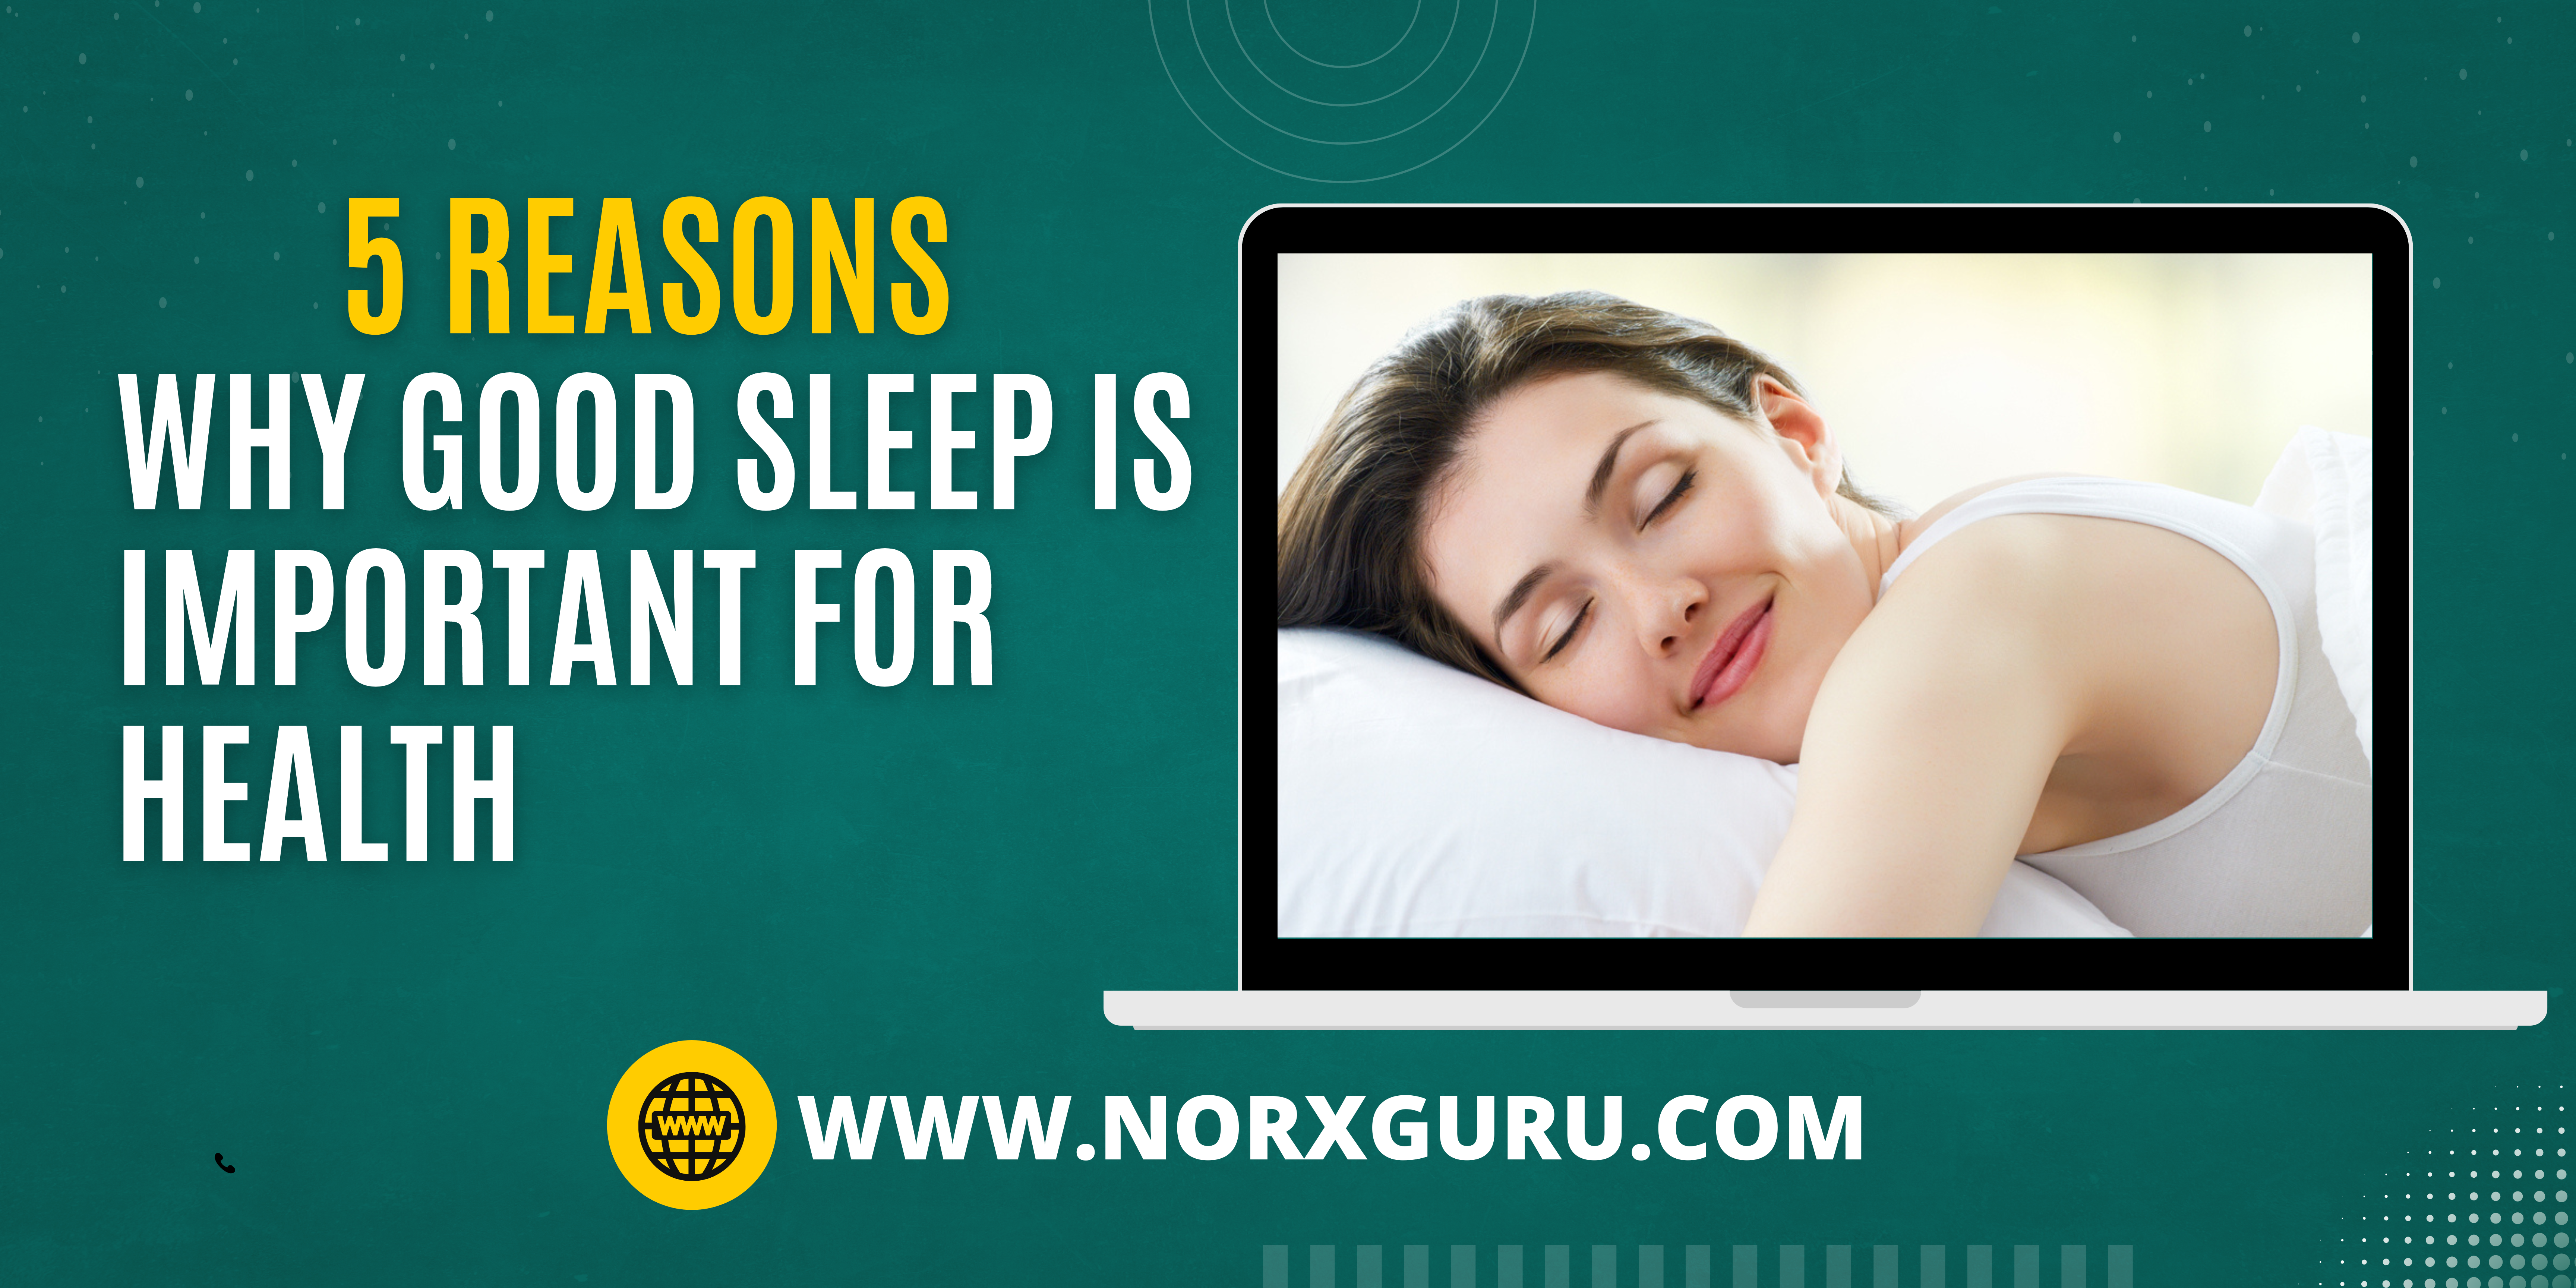 5 REASONS WHY GOOD SLEEP IS IMPORTANT FOR HEALTH